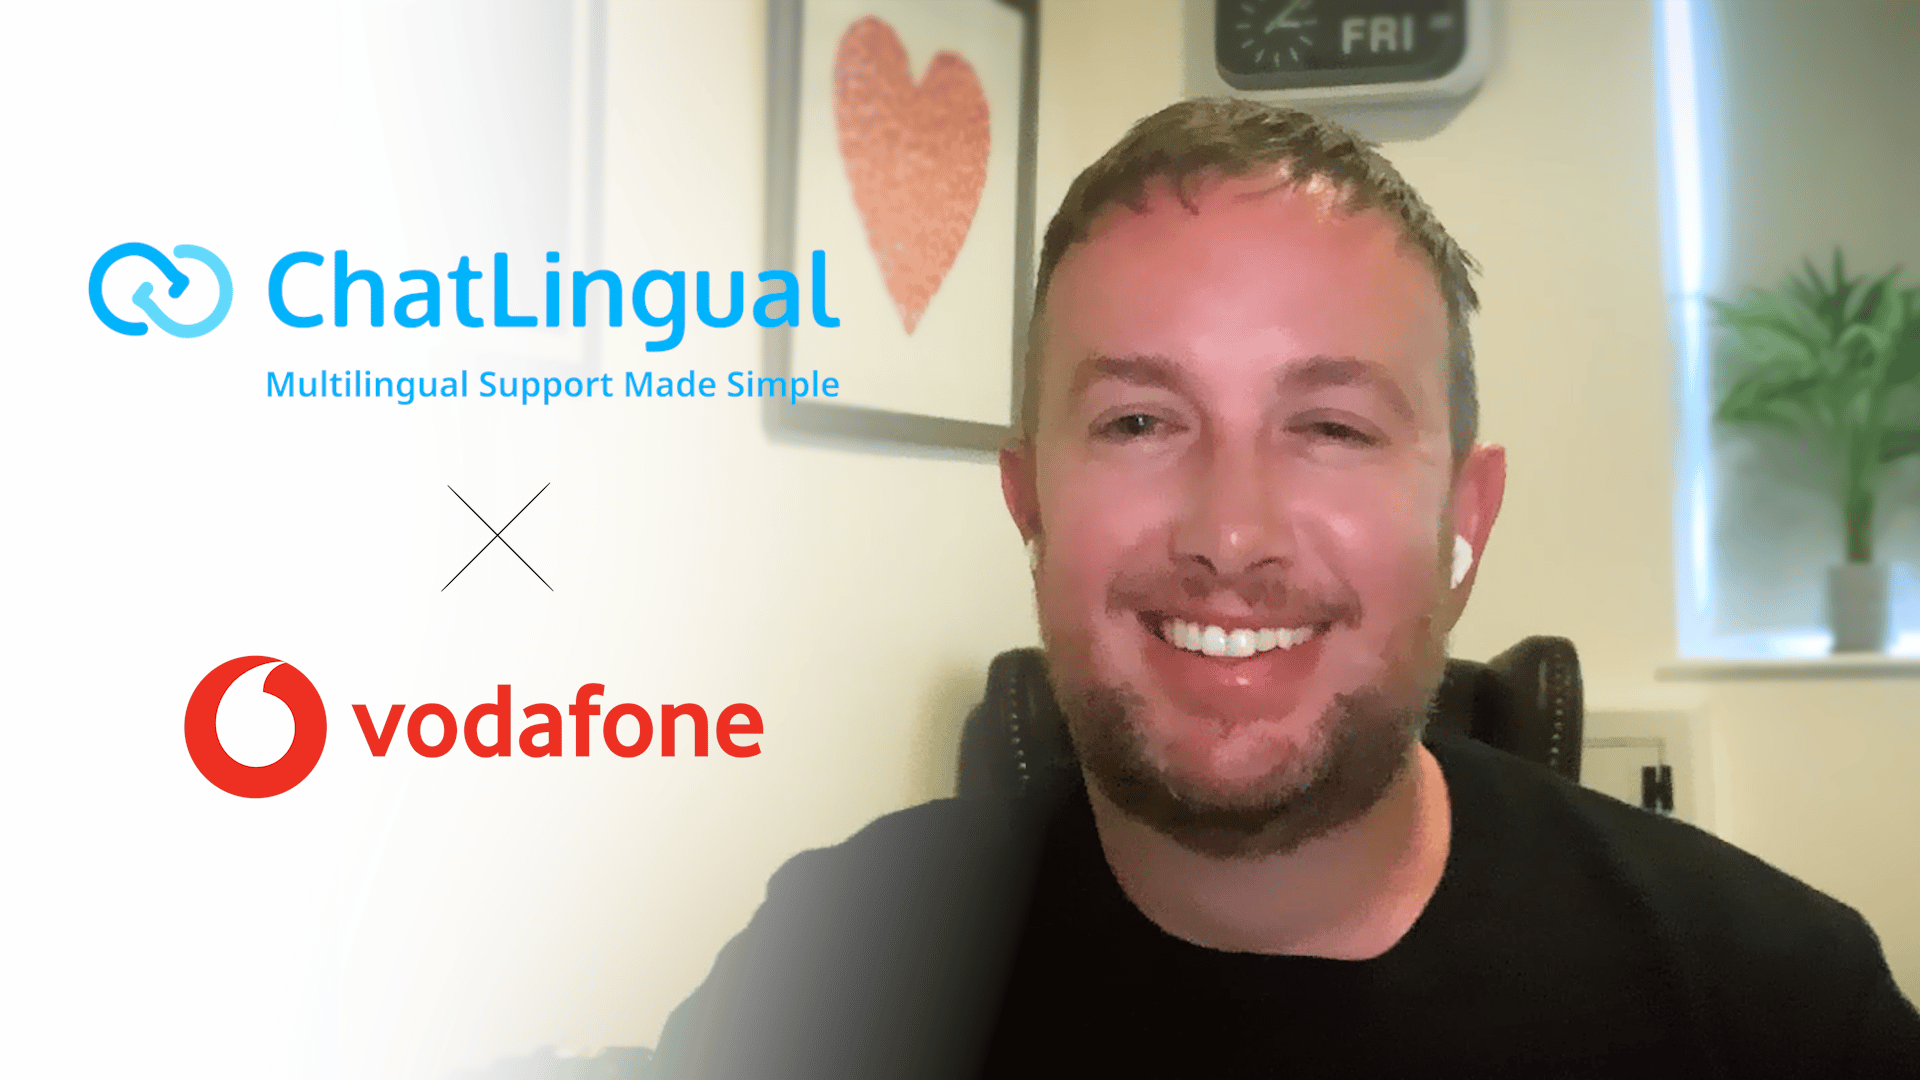 Vodafone partners with ChatLingual for multilingual customer support